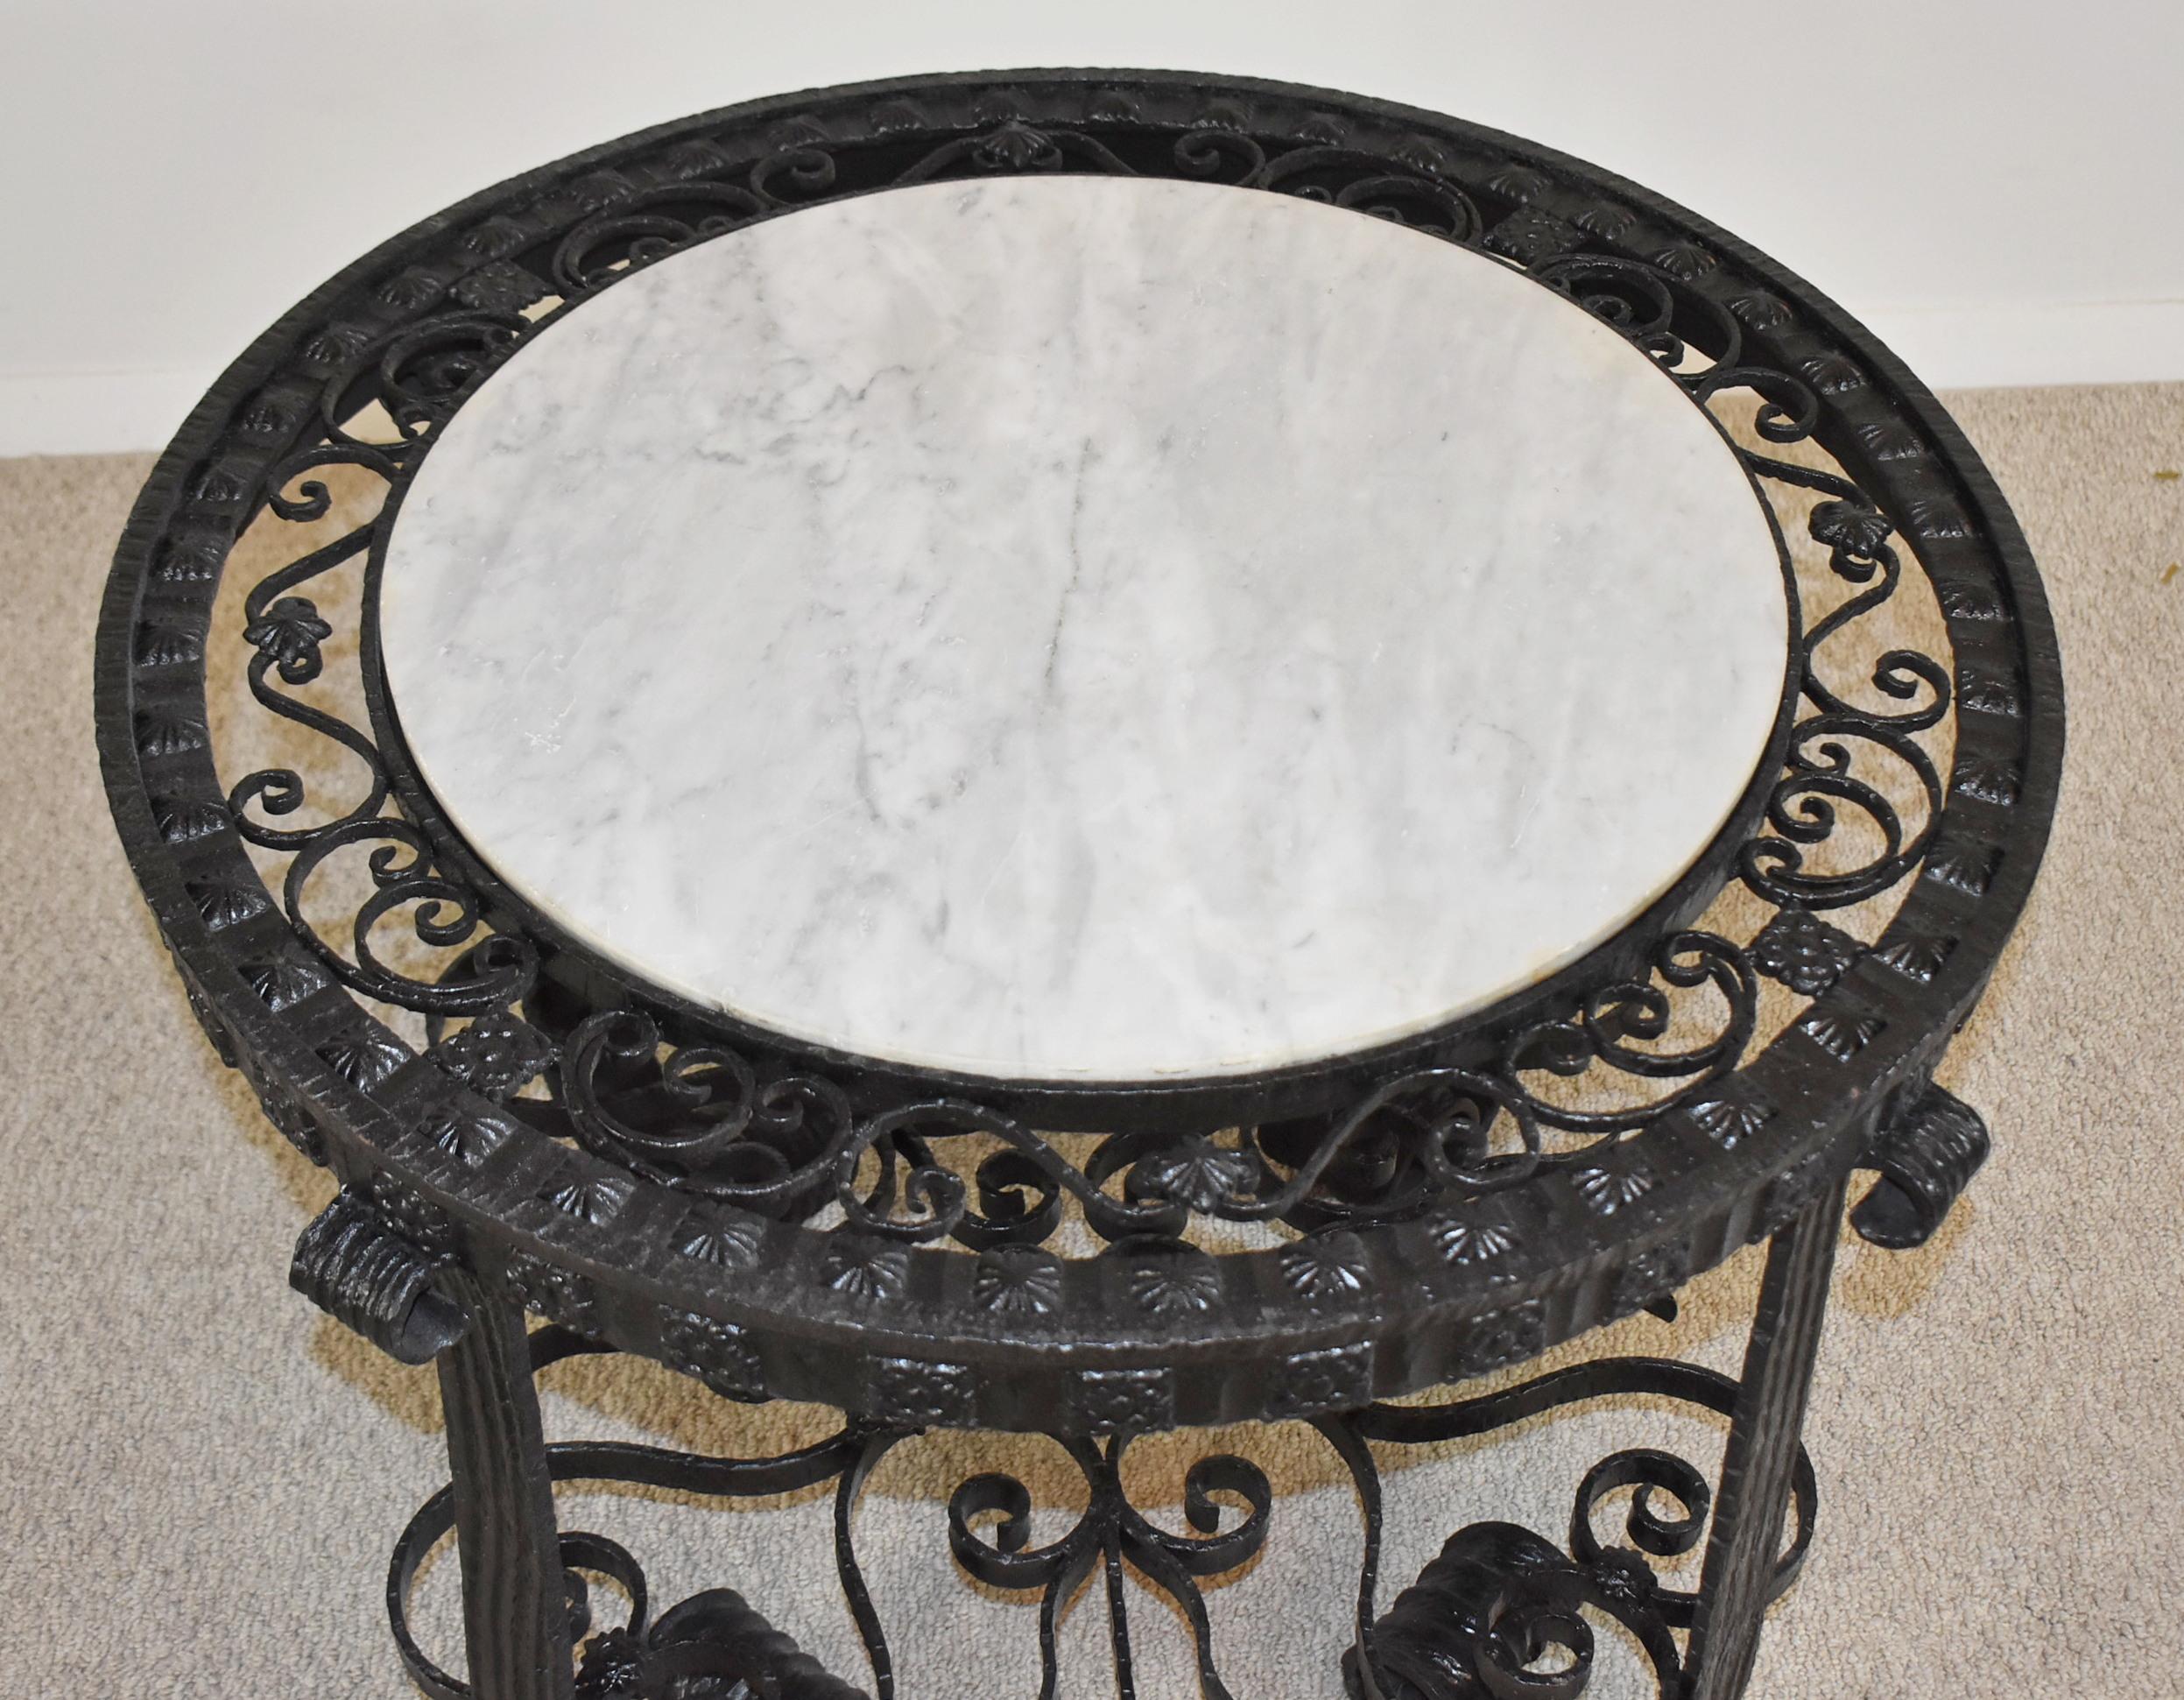 Spanish Revival wrought iron table with marble top. Circa 1920s. Circular inset removable white and gray marble surrounded by iron latticework over four scrolled legs and connected by pierced scrollwork stretcher. South Europe influence in the 20th